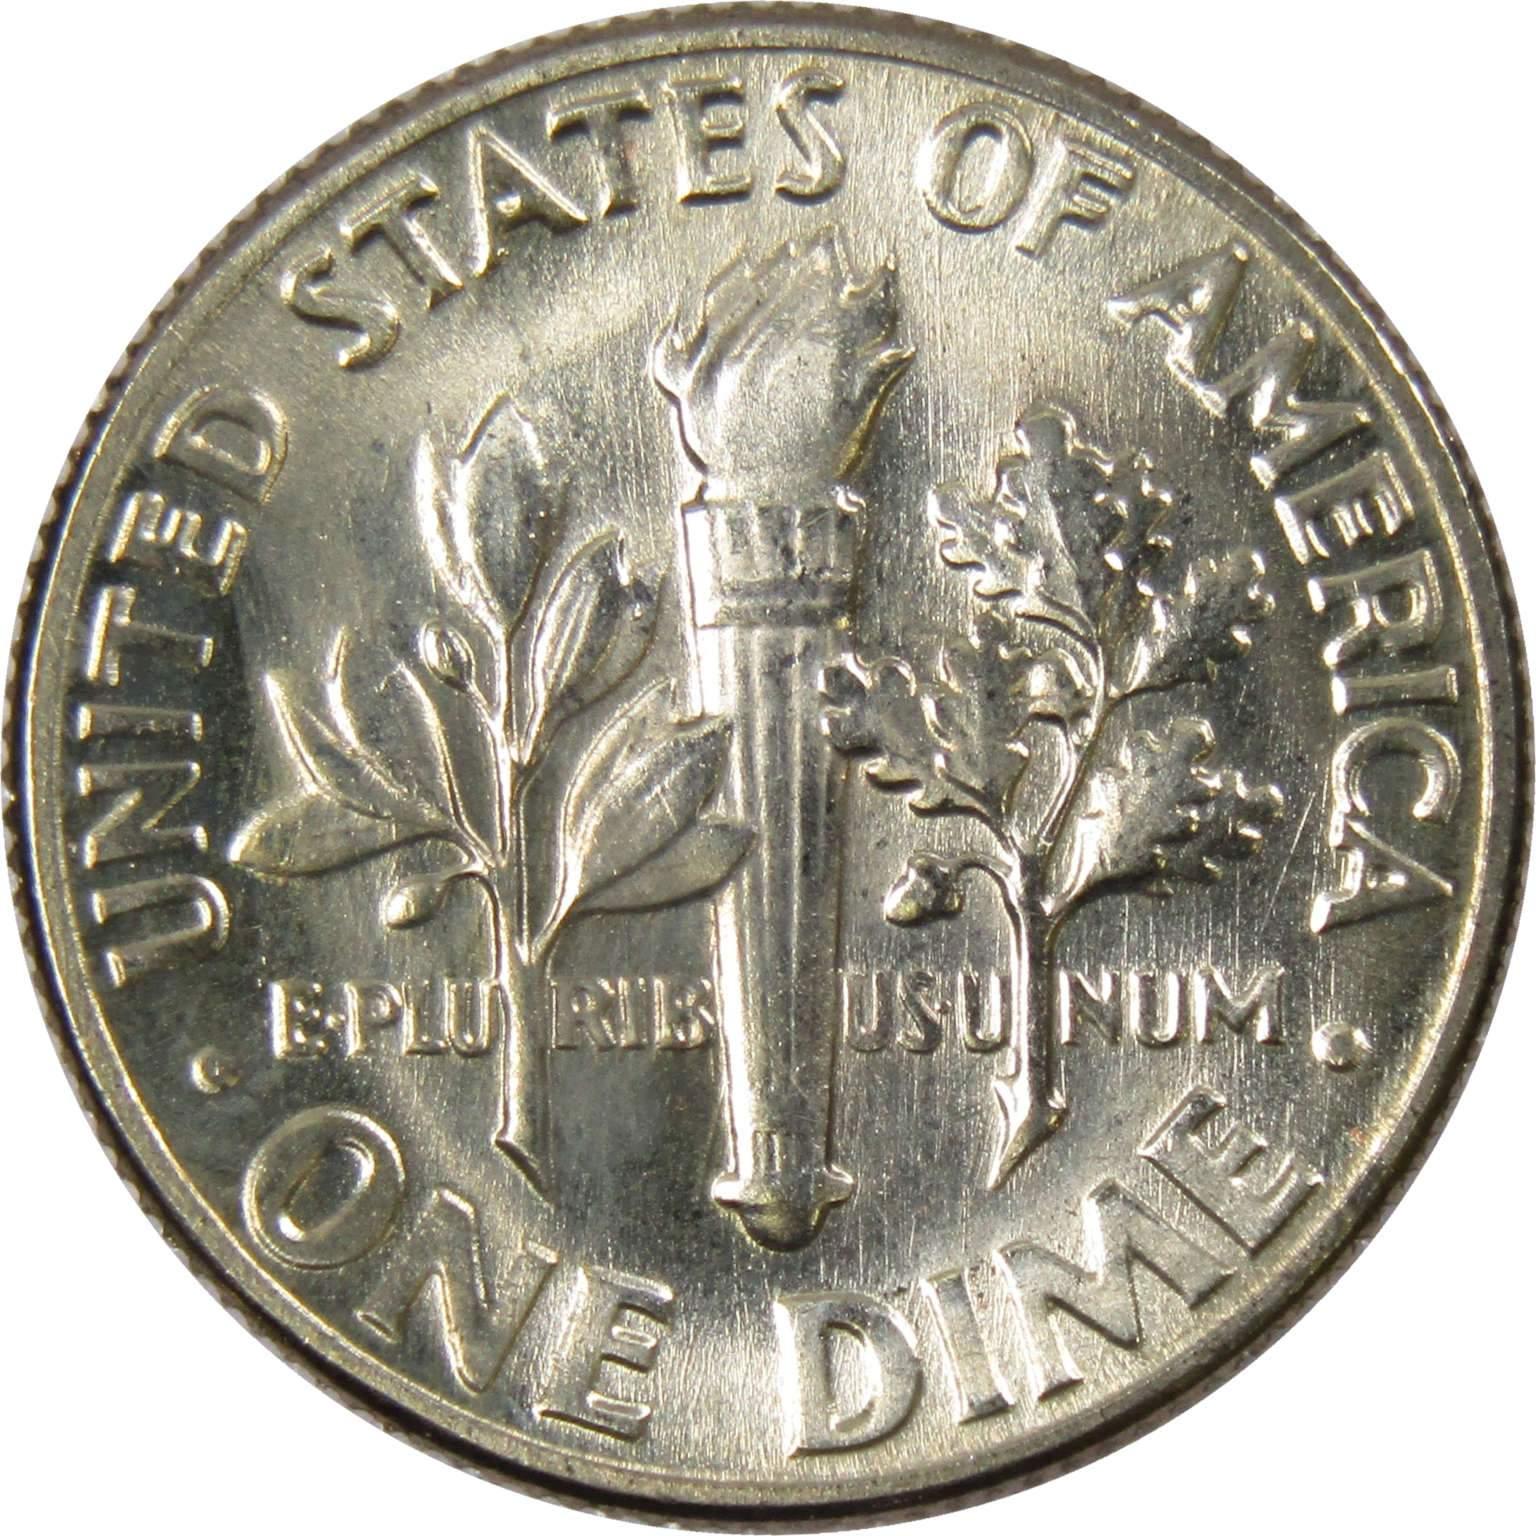 1974 D Roosevelt Dime BU Uncirculated Mint State 10c US Coin Collectible